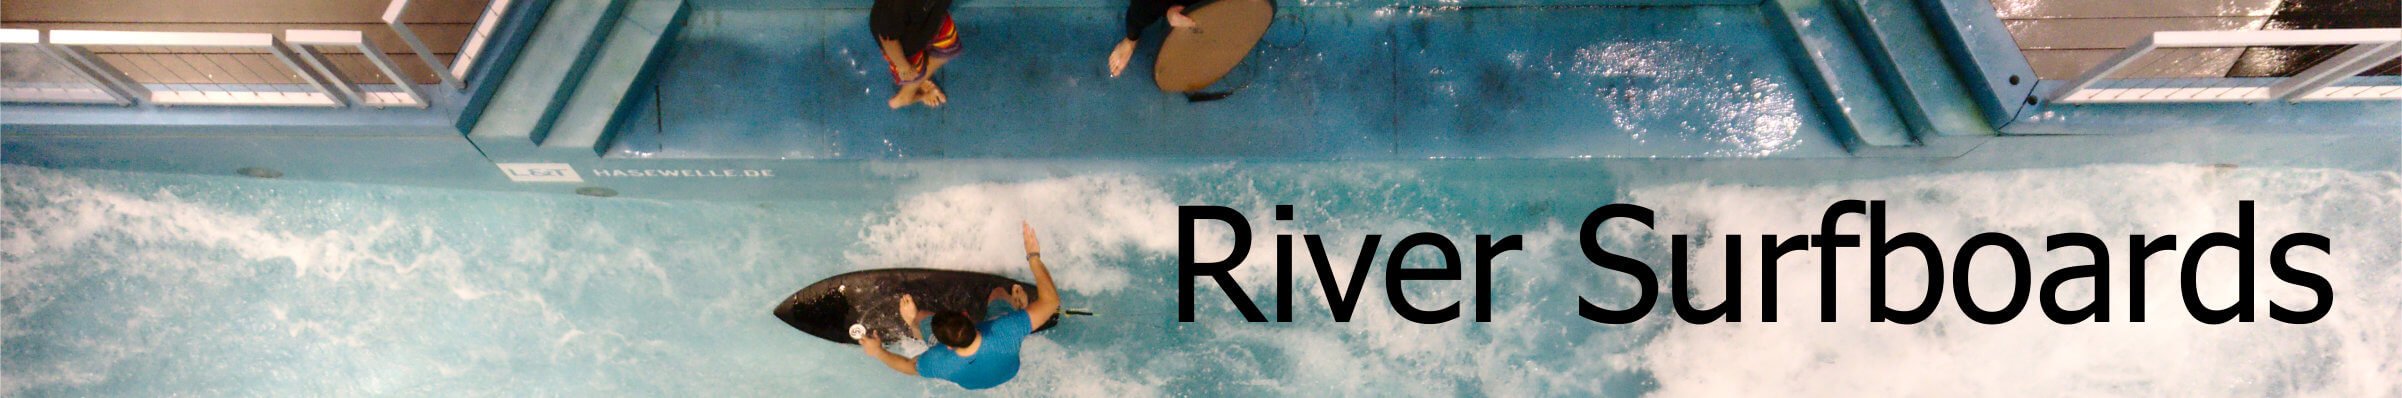 River Surfboard Guide buying advice Header